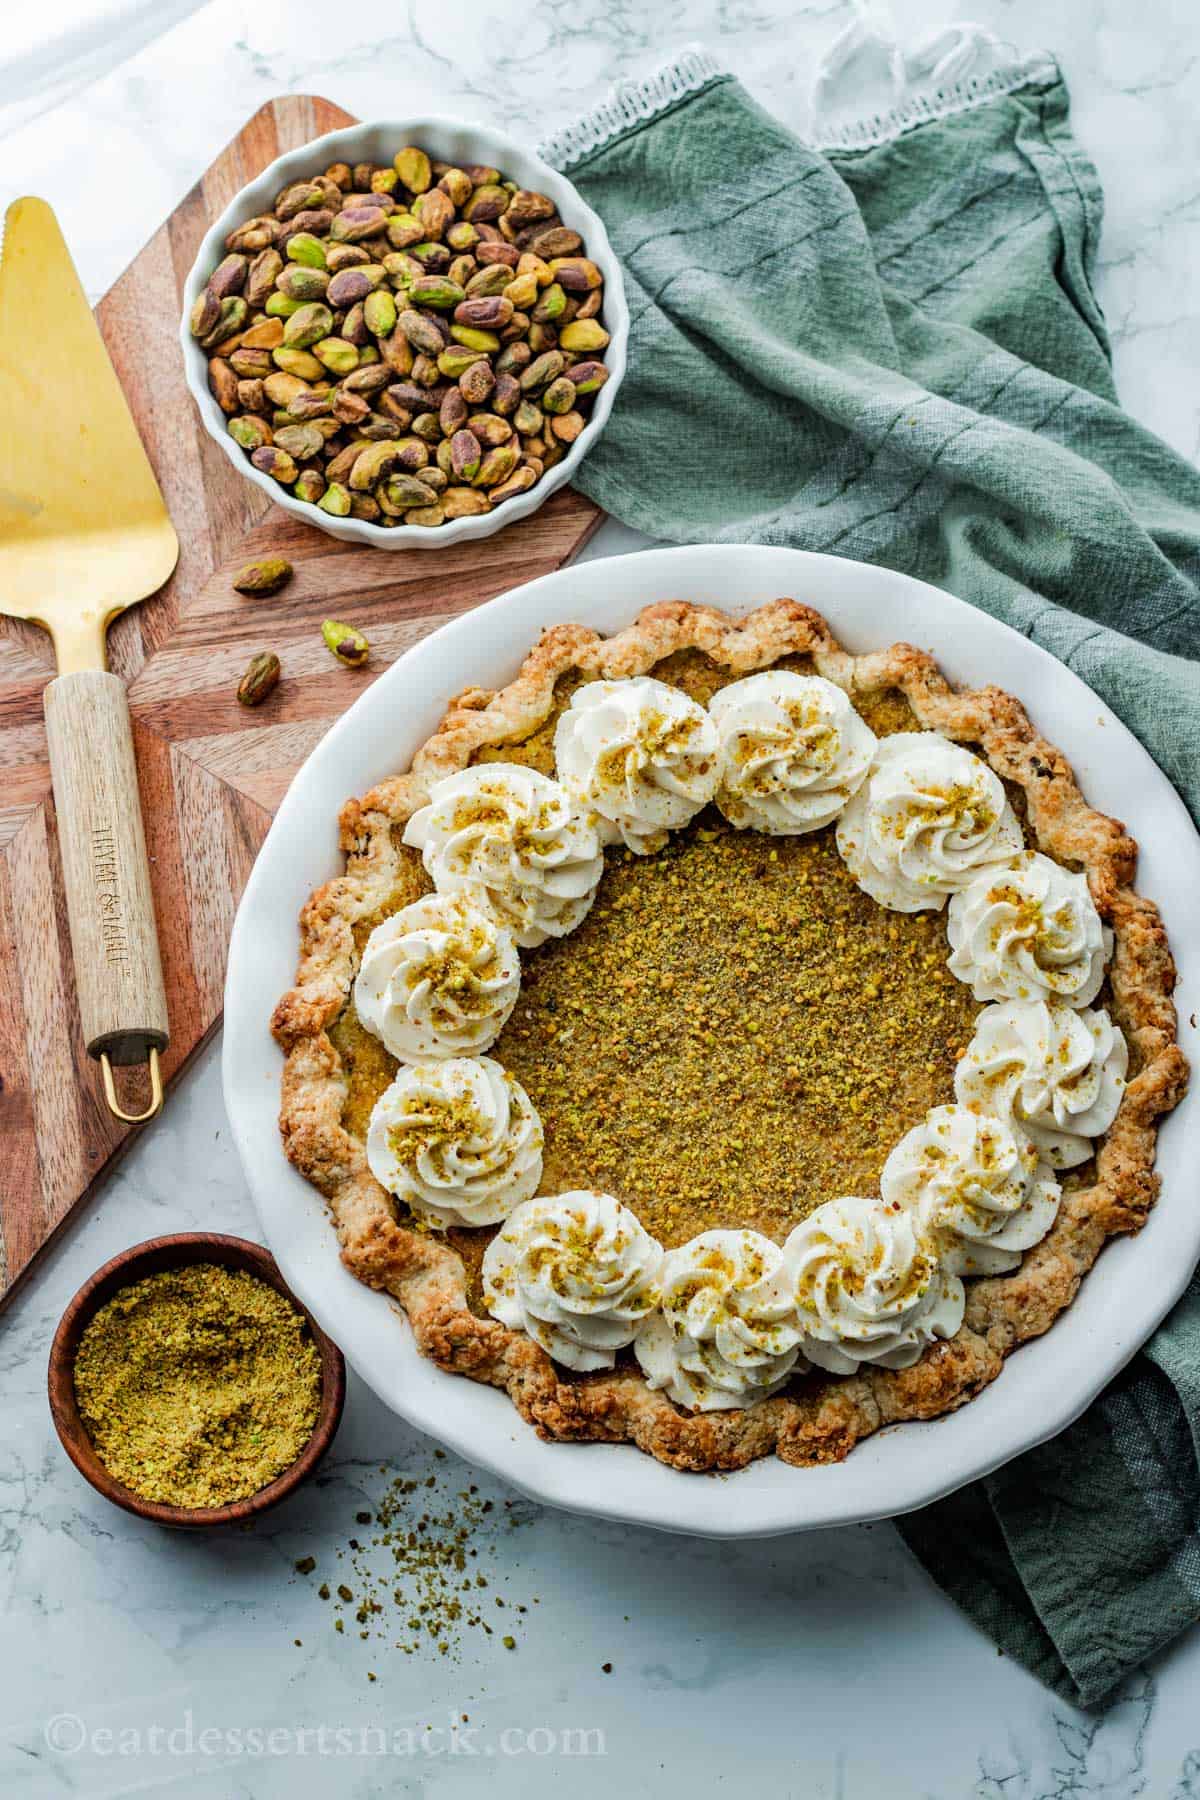 Baked pistachio pie with spatula and bowl of pistachios with green dish towel on marble countertop.